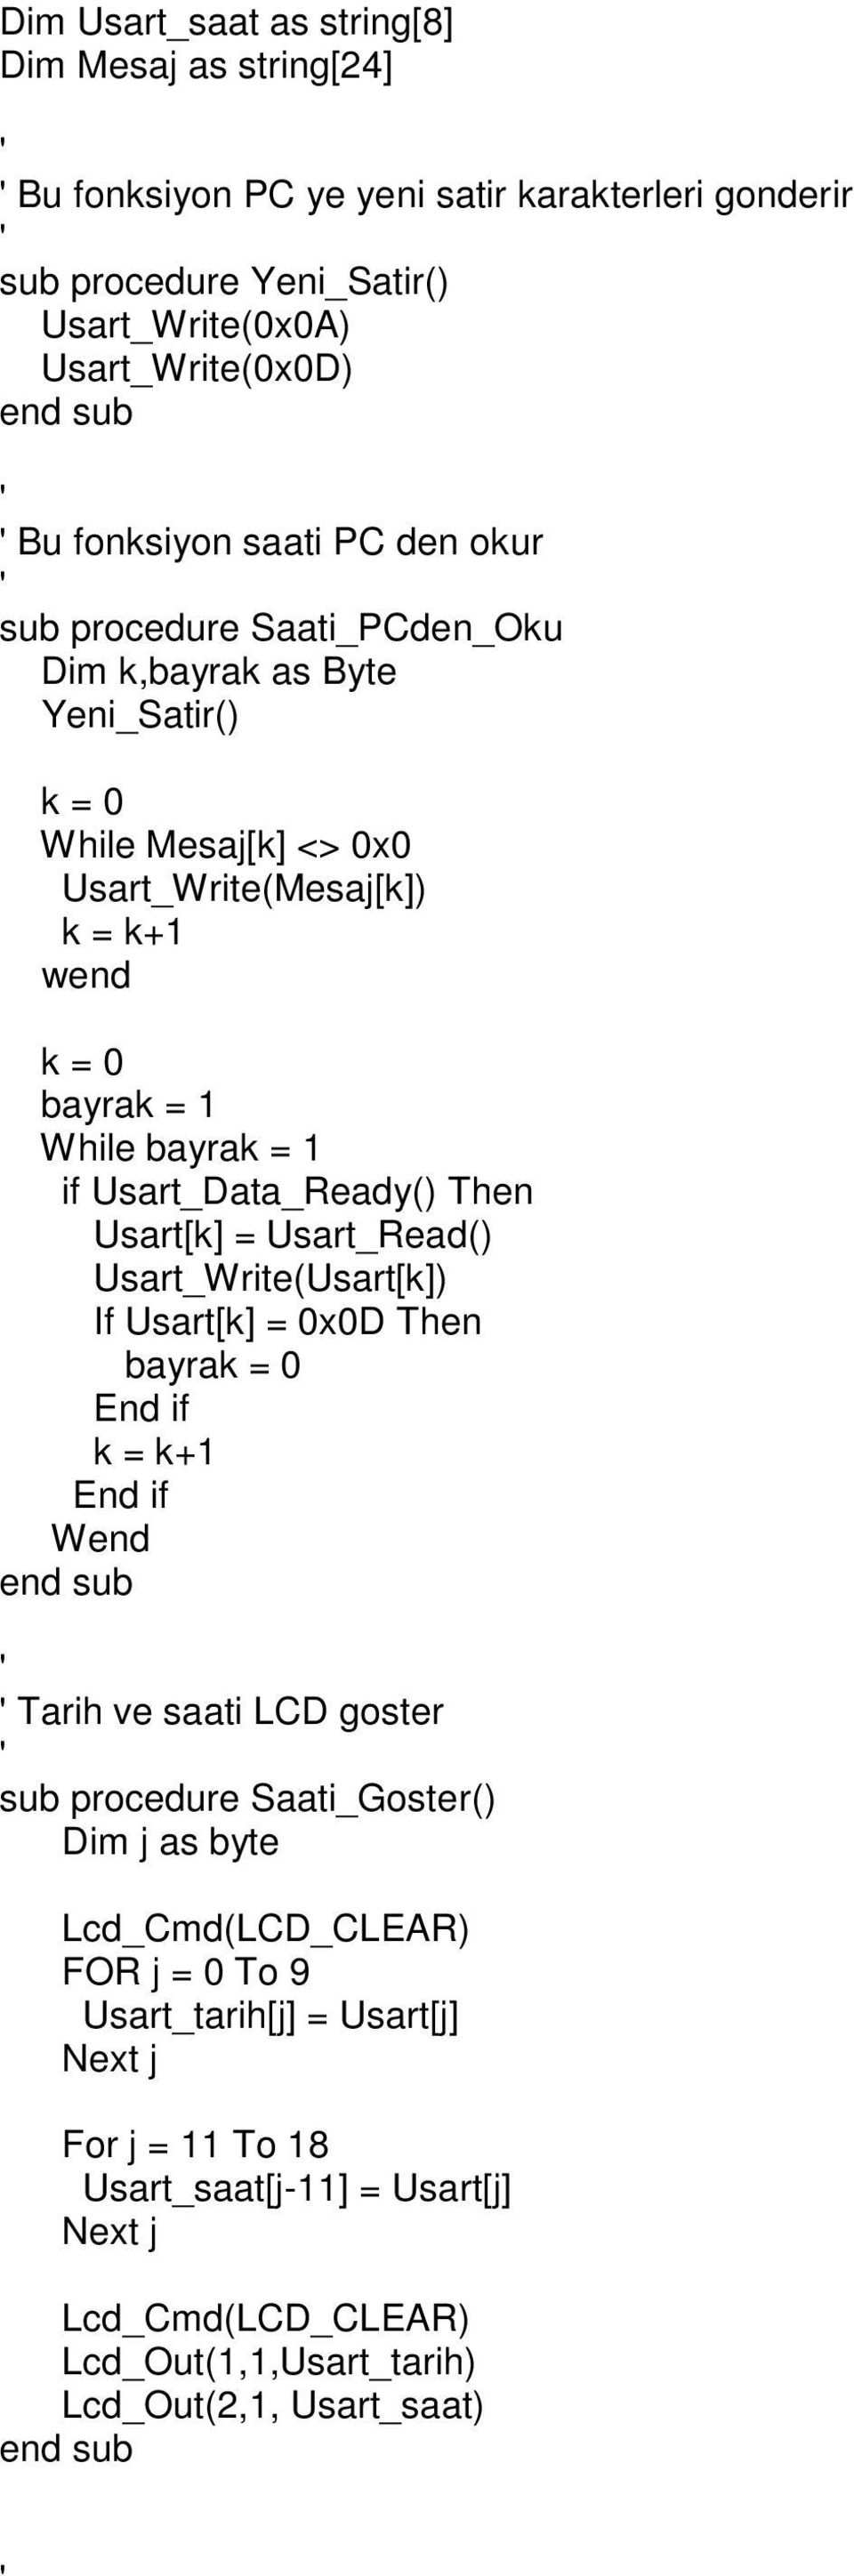 Usart_Data_Ready() Then Usart[k] = Usart_Read() Usart_Write(Usart[k]) If Usart[k] = 0x0D Then bayrak = 0 End if k = k+1 End if Wend Tarih ve saati LCD goster sub procedure Saati_Goster()